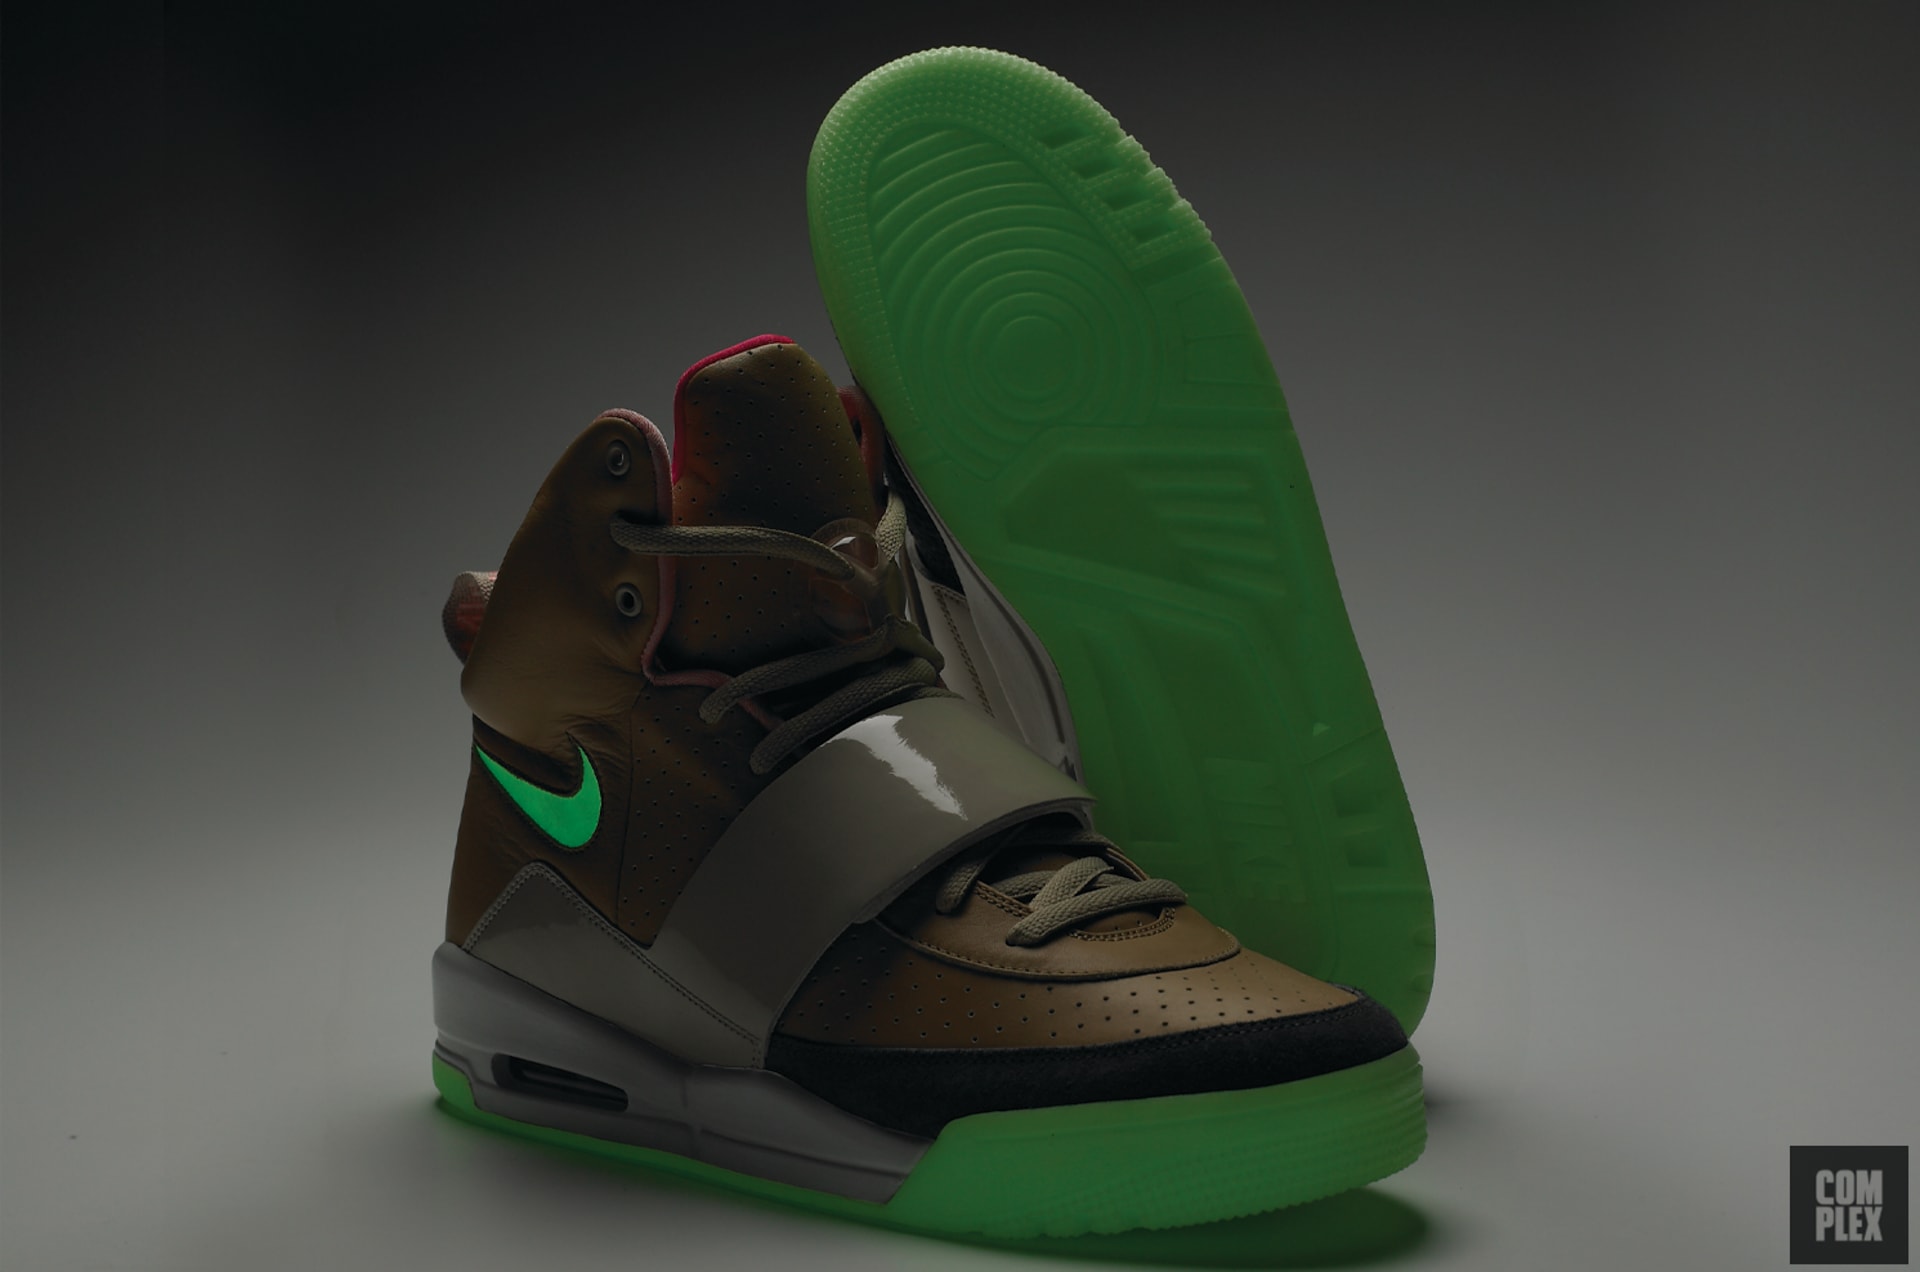 Entrada Enmarañarse Fragante Air Yeezy Has Arrived: A Kanye West and Nike Collaboration | Complex